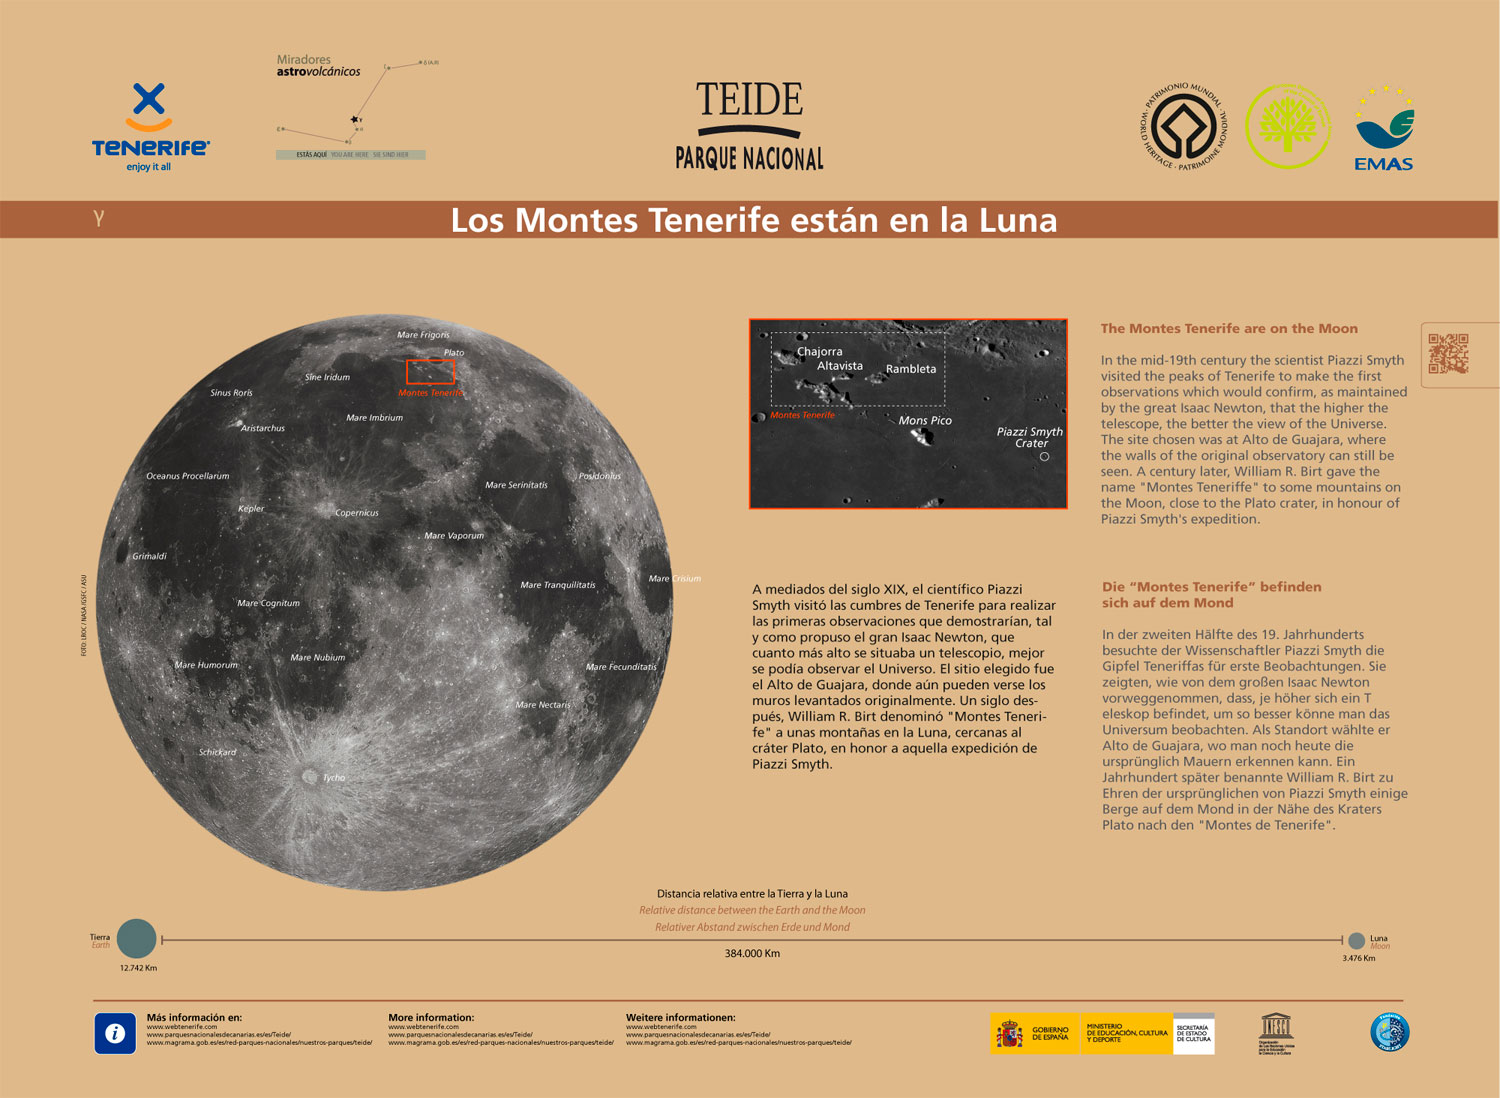 The Montes Teneriffe are on the moon